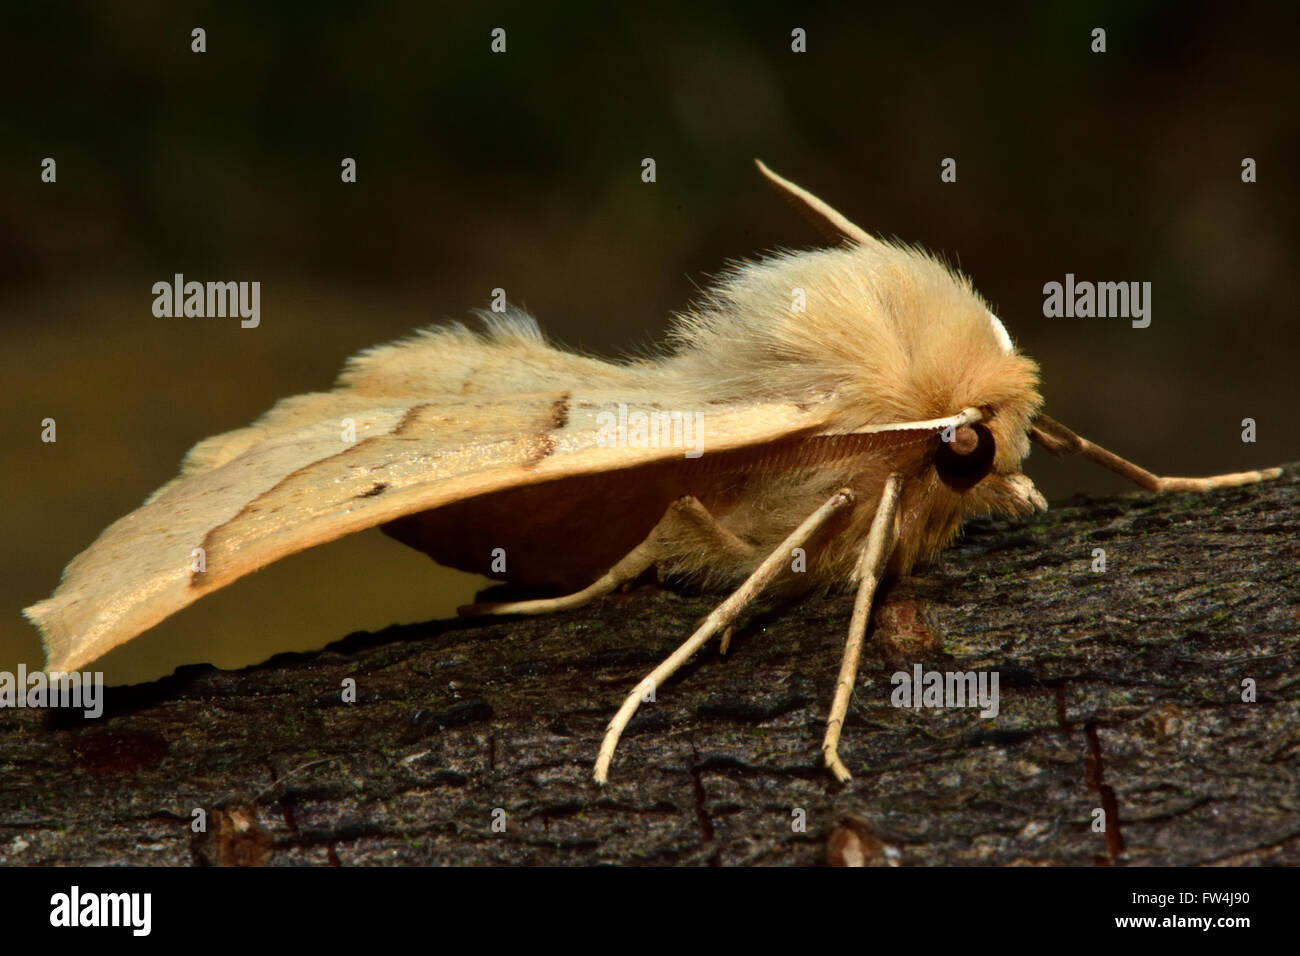 Scalloped oak moth (Crocallis elinguaria) in profile. Moth in the family Geometridae, at rest on wood seen from the side Stock Photo